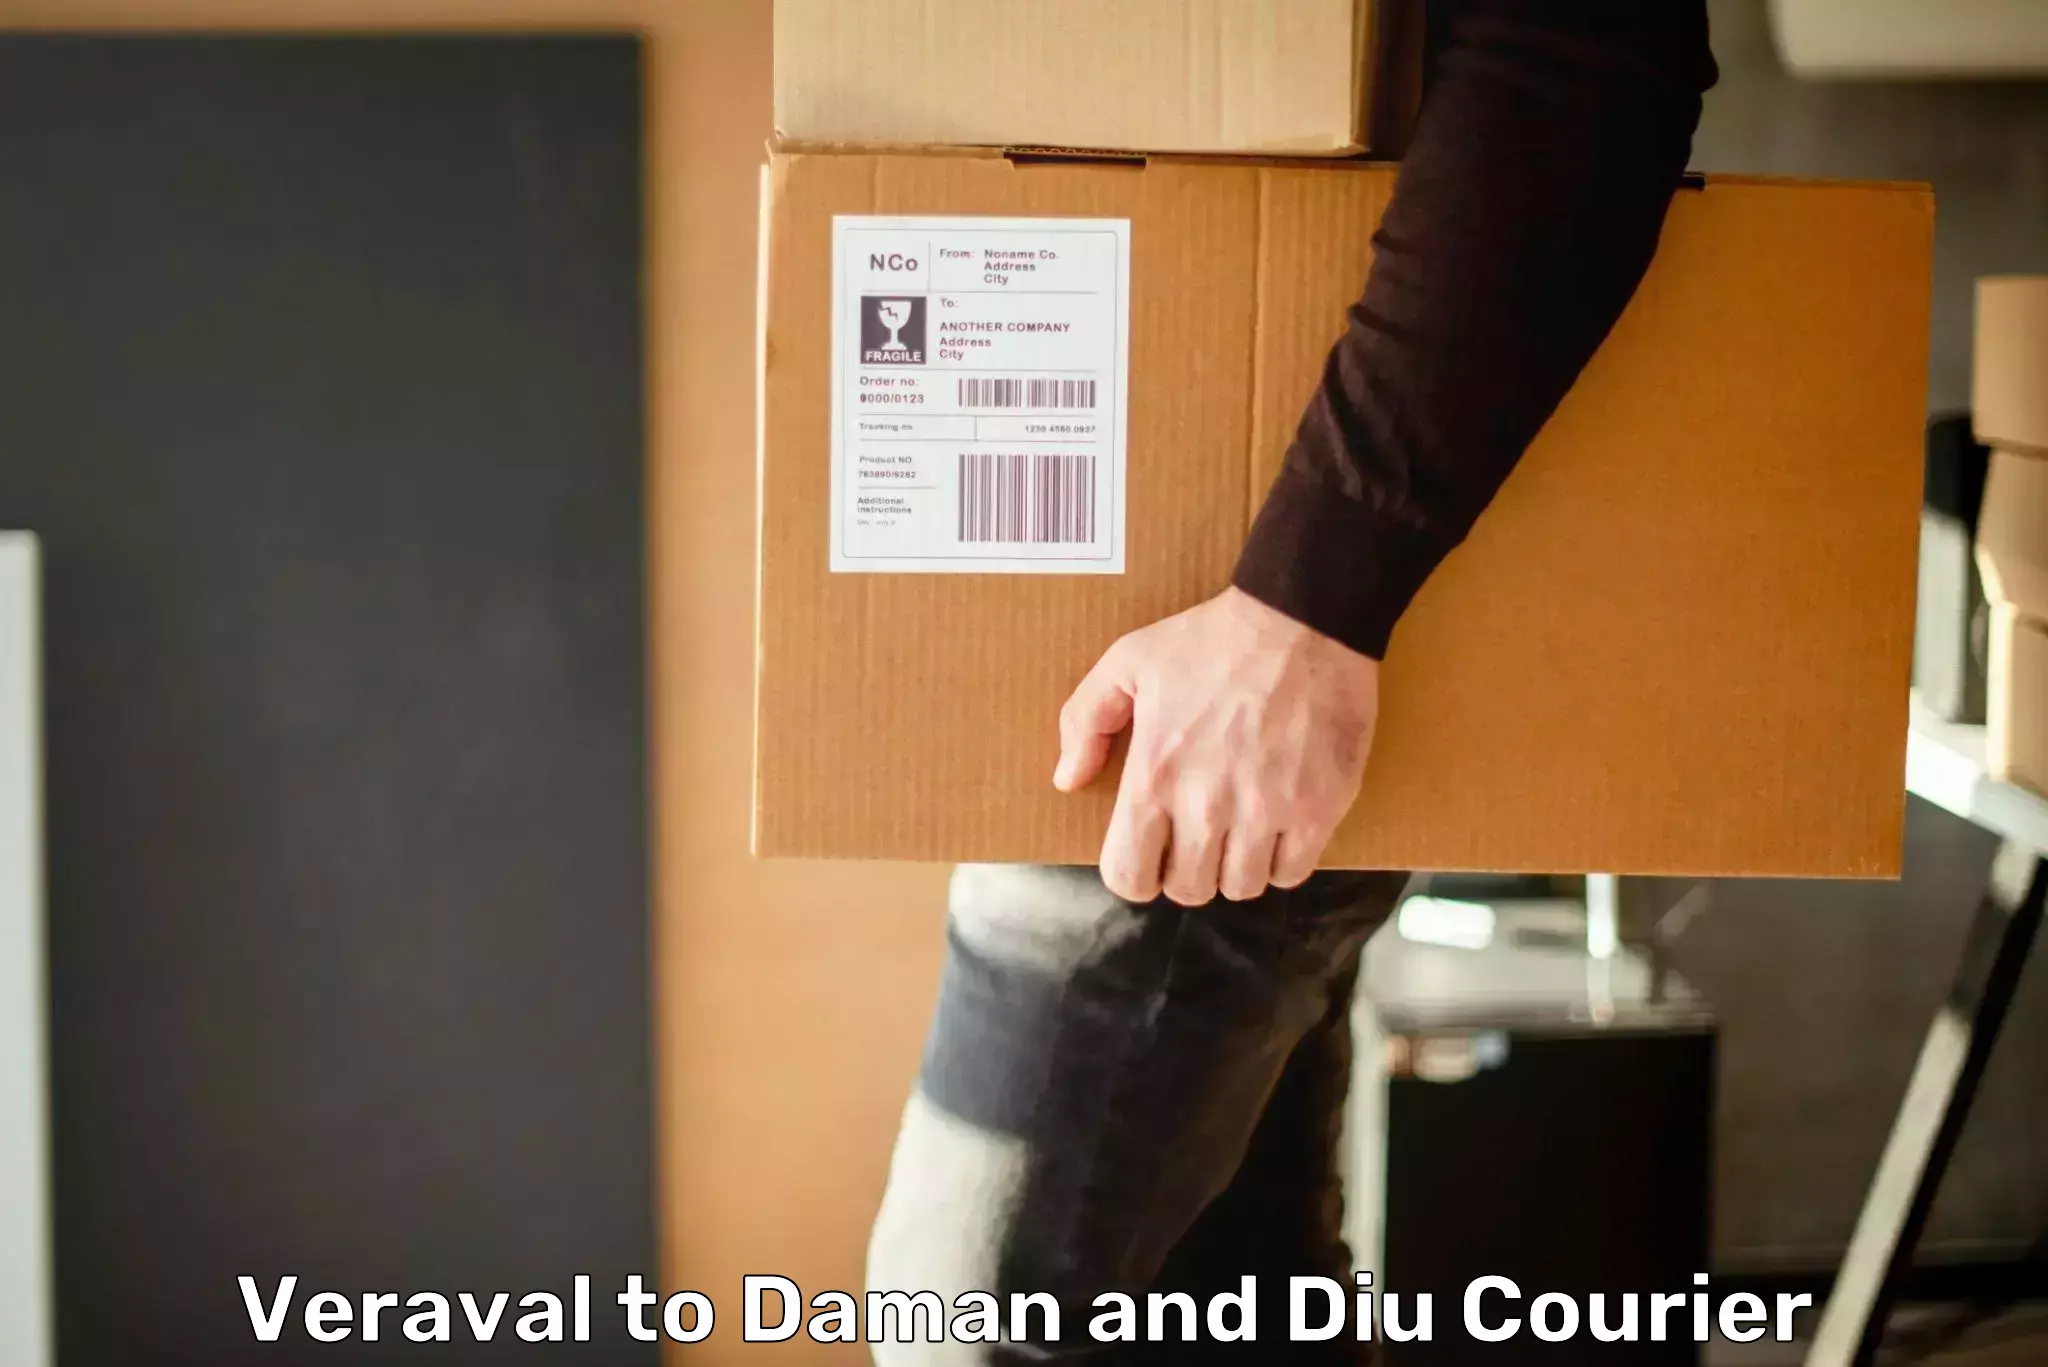 Online package tracking Veraval to Daman